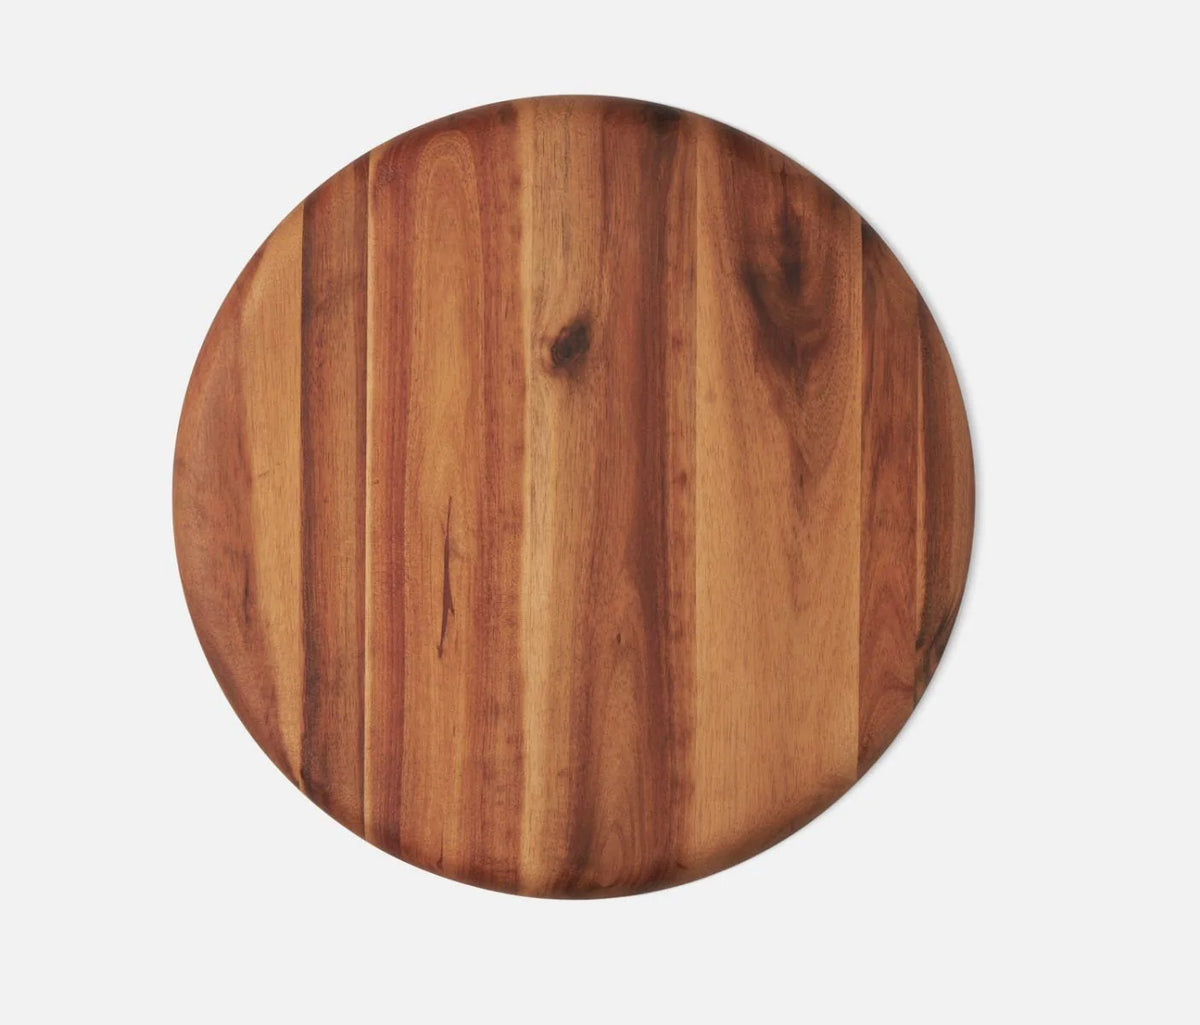 Kennedy Acacia Wood Charger, Set of 4